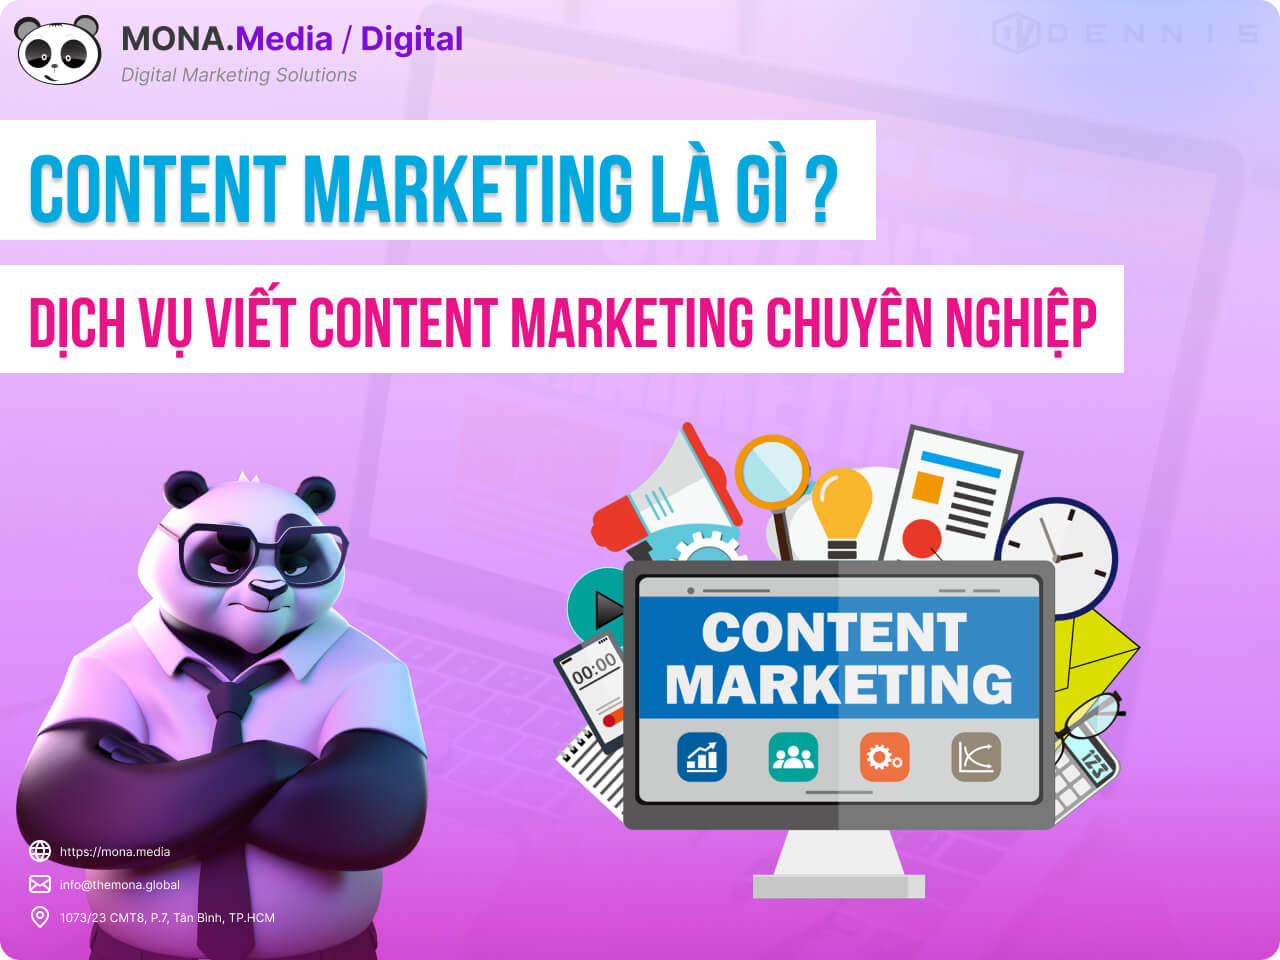 Dịch vụ content marketing